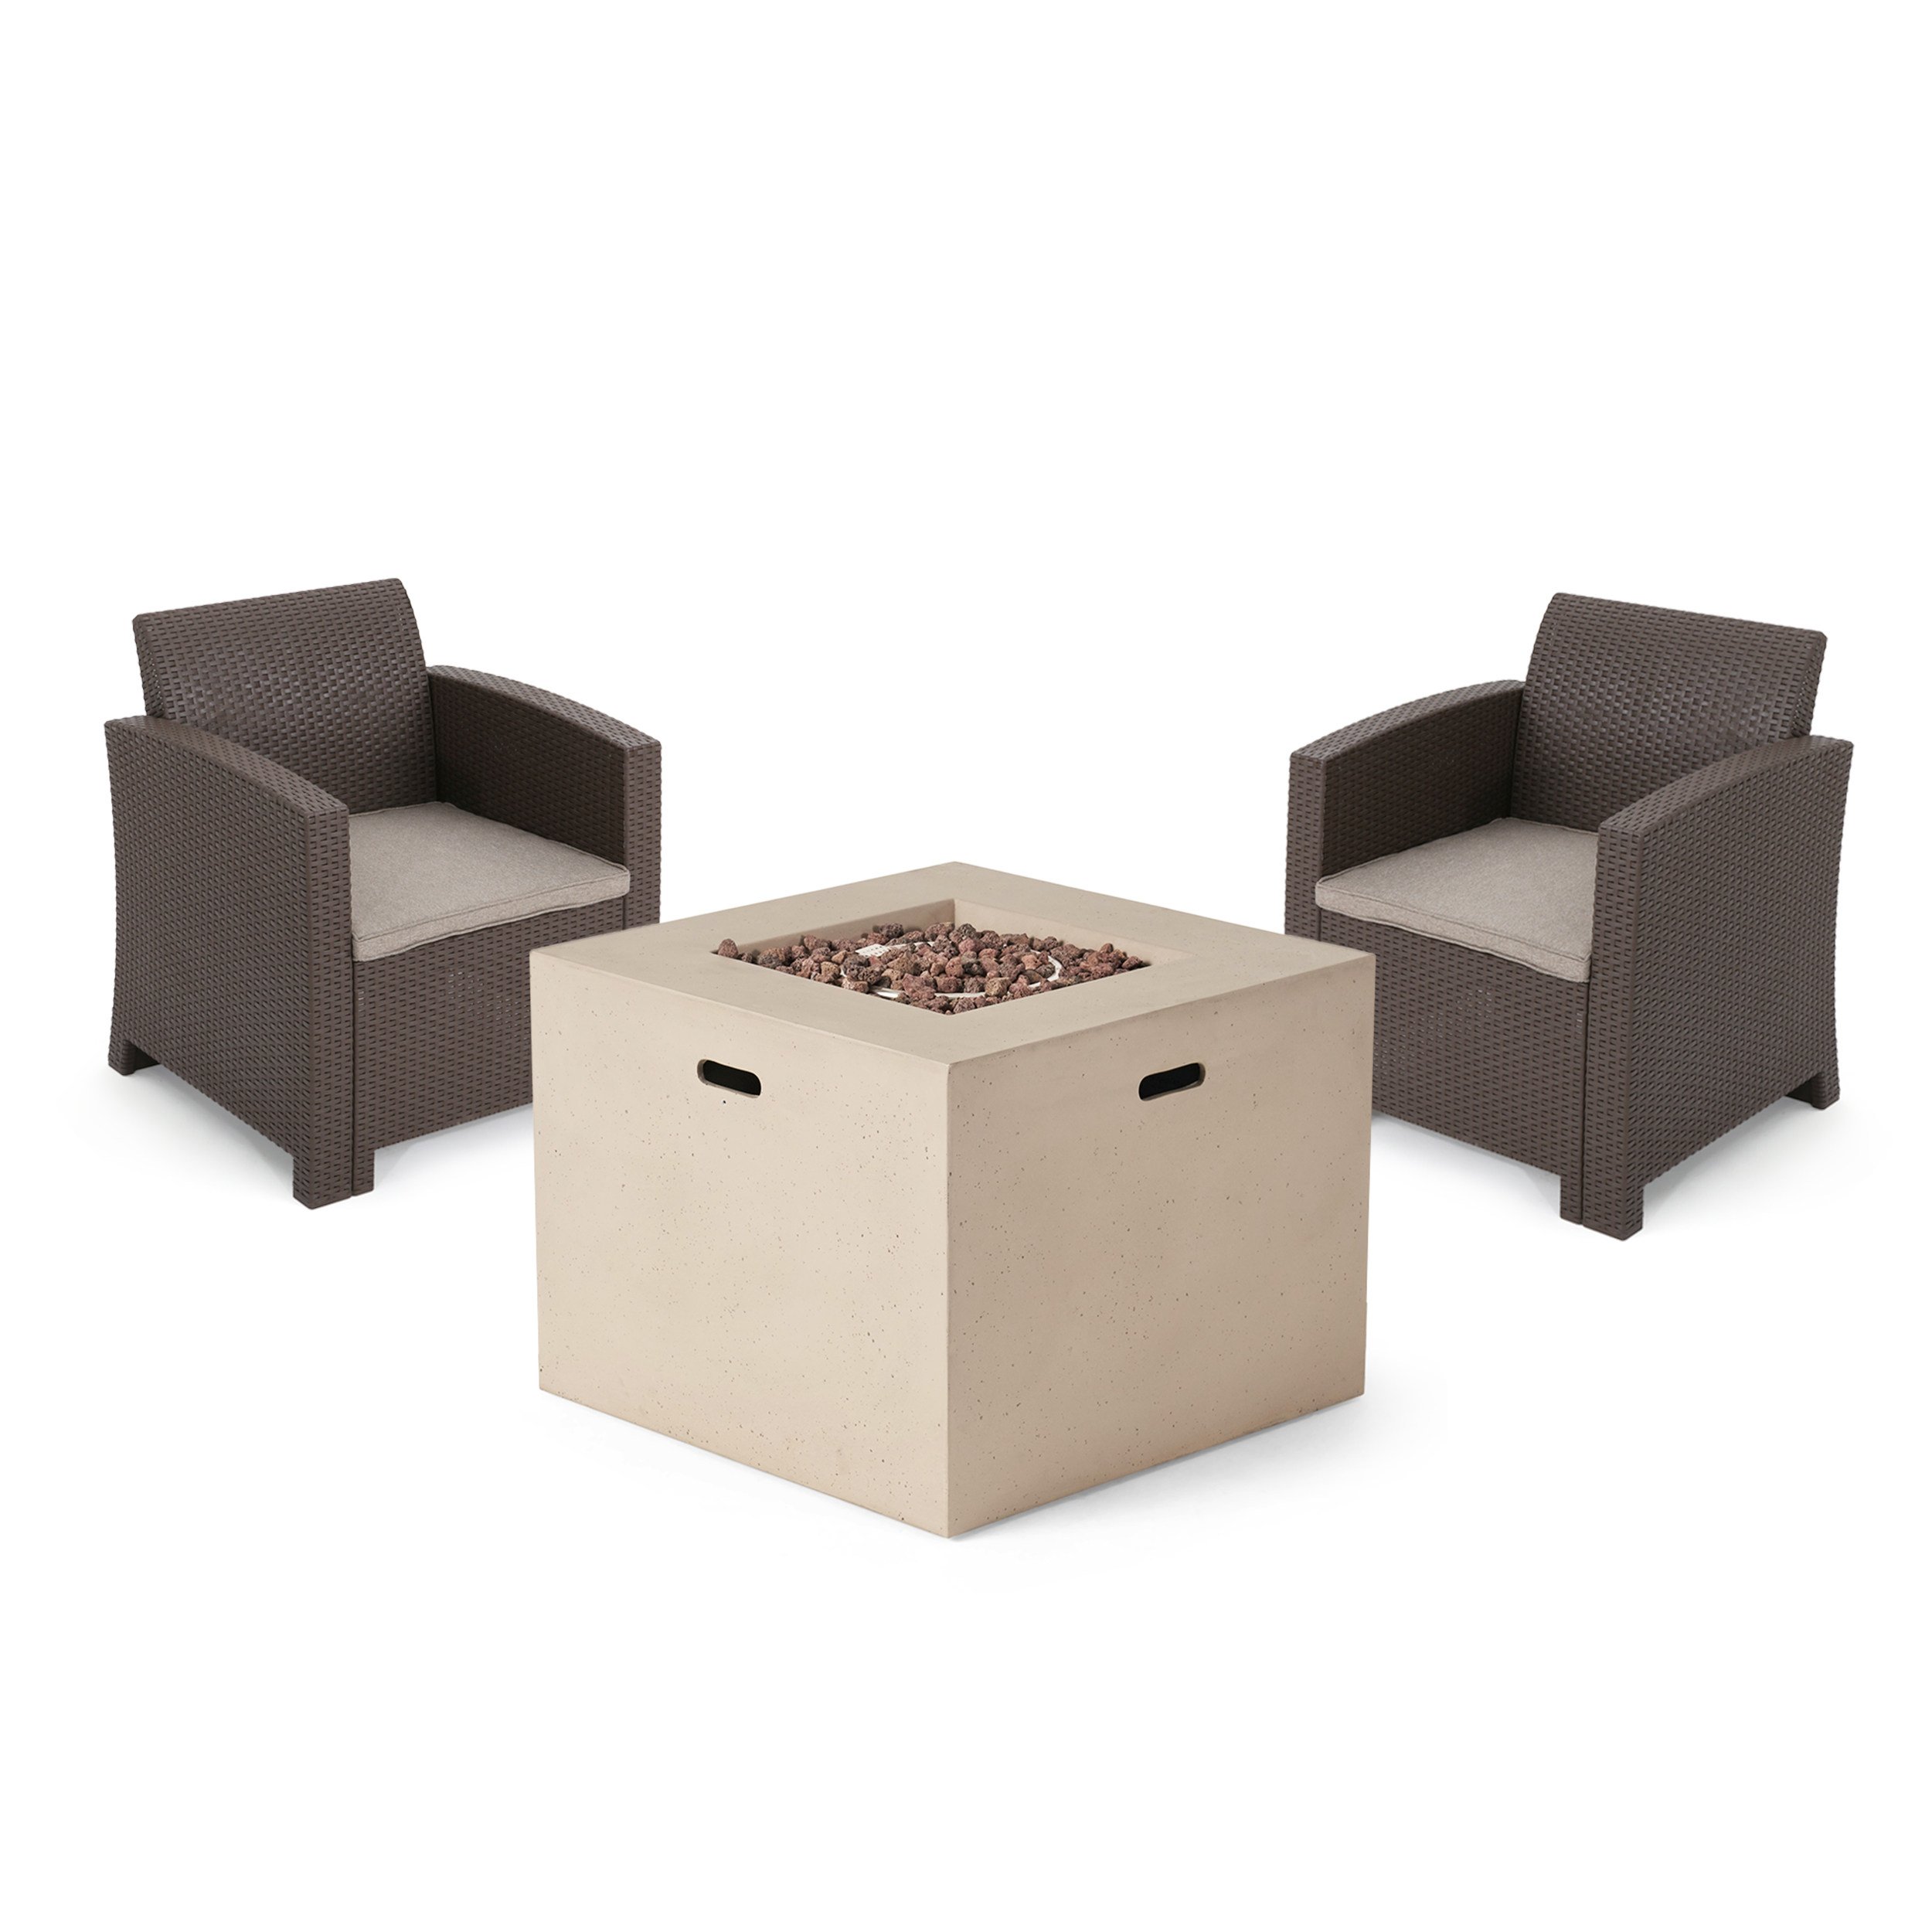 Agatha Outdoor Wicker Club Chair Chat Set With Propane Fire Pit - Brown + Mixed Biege